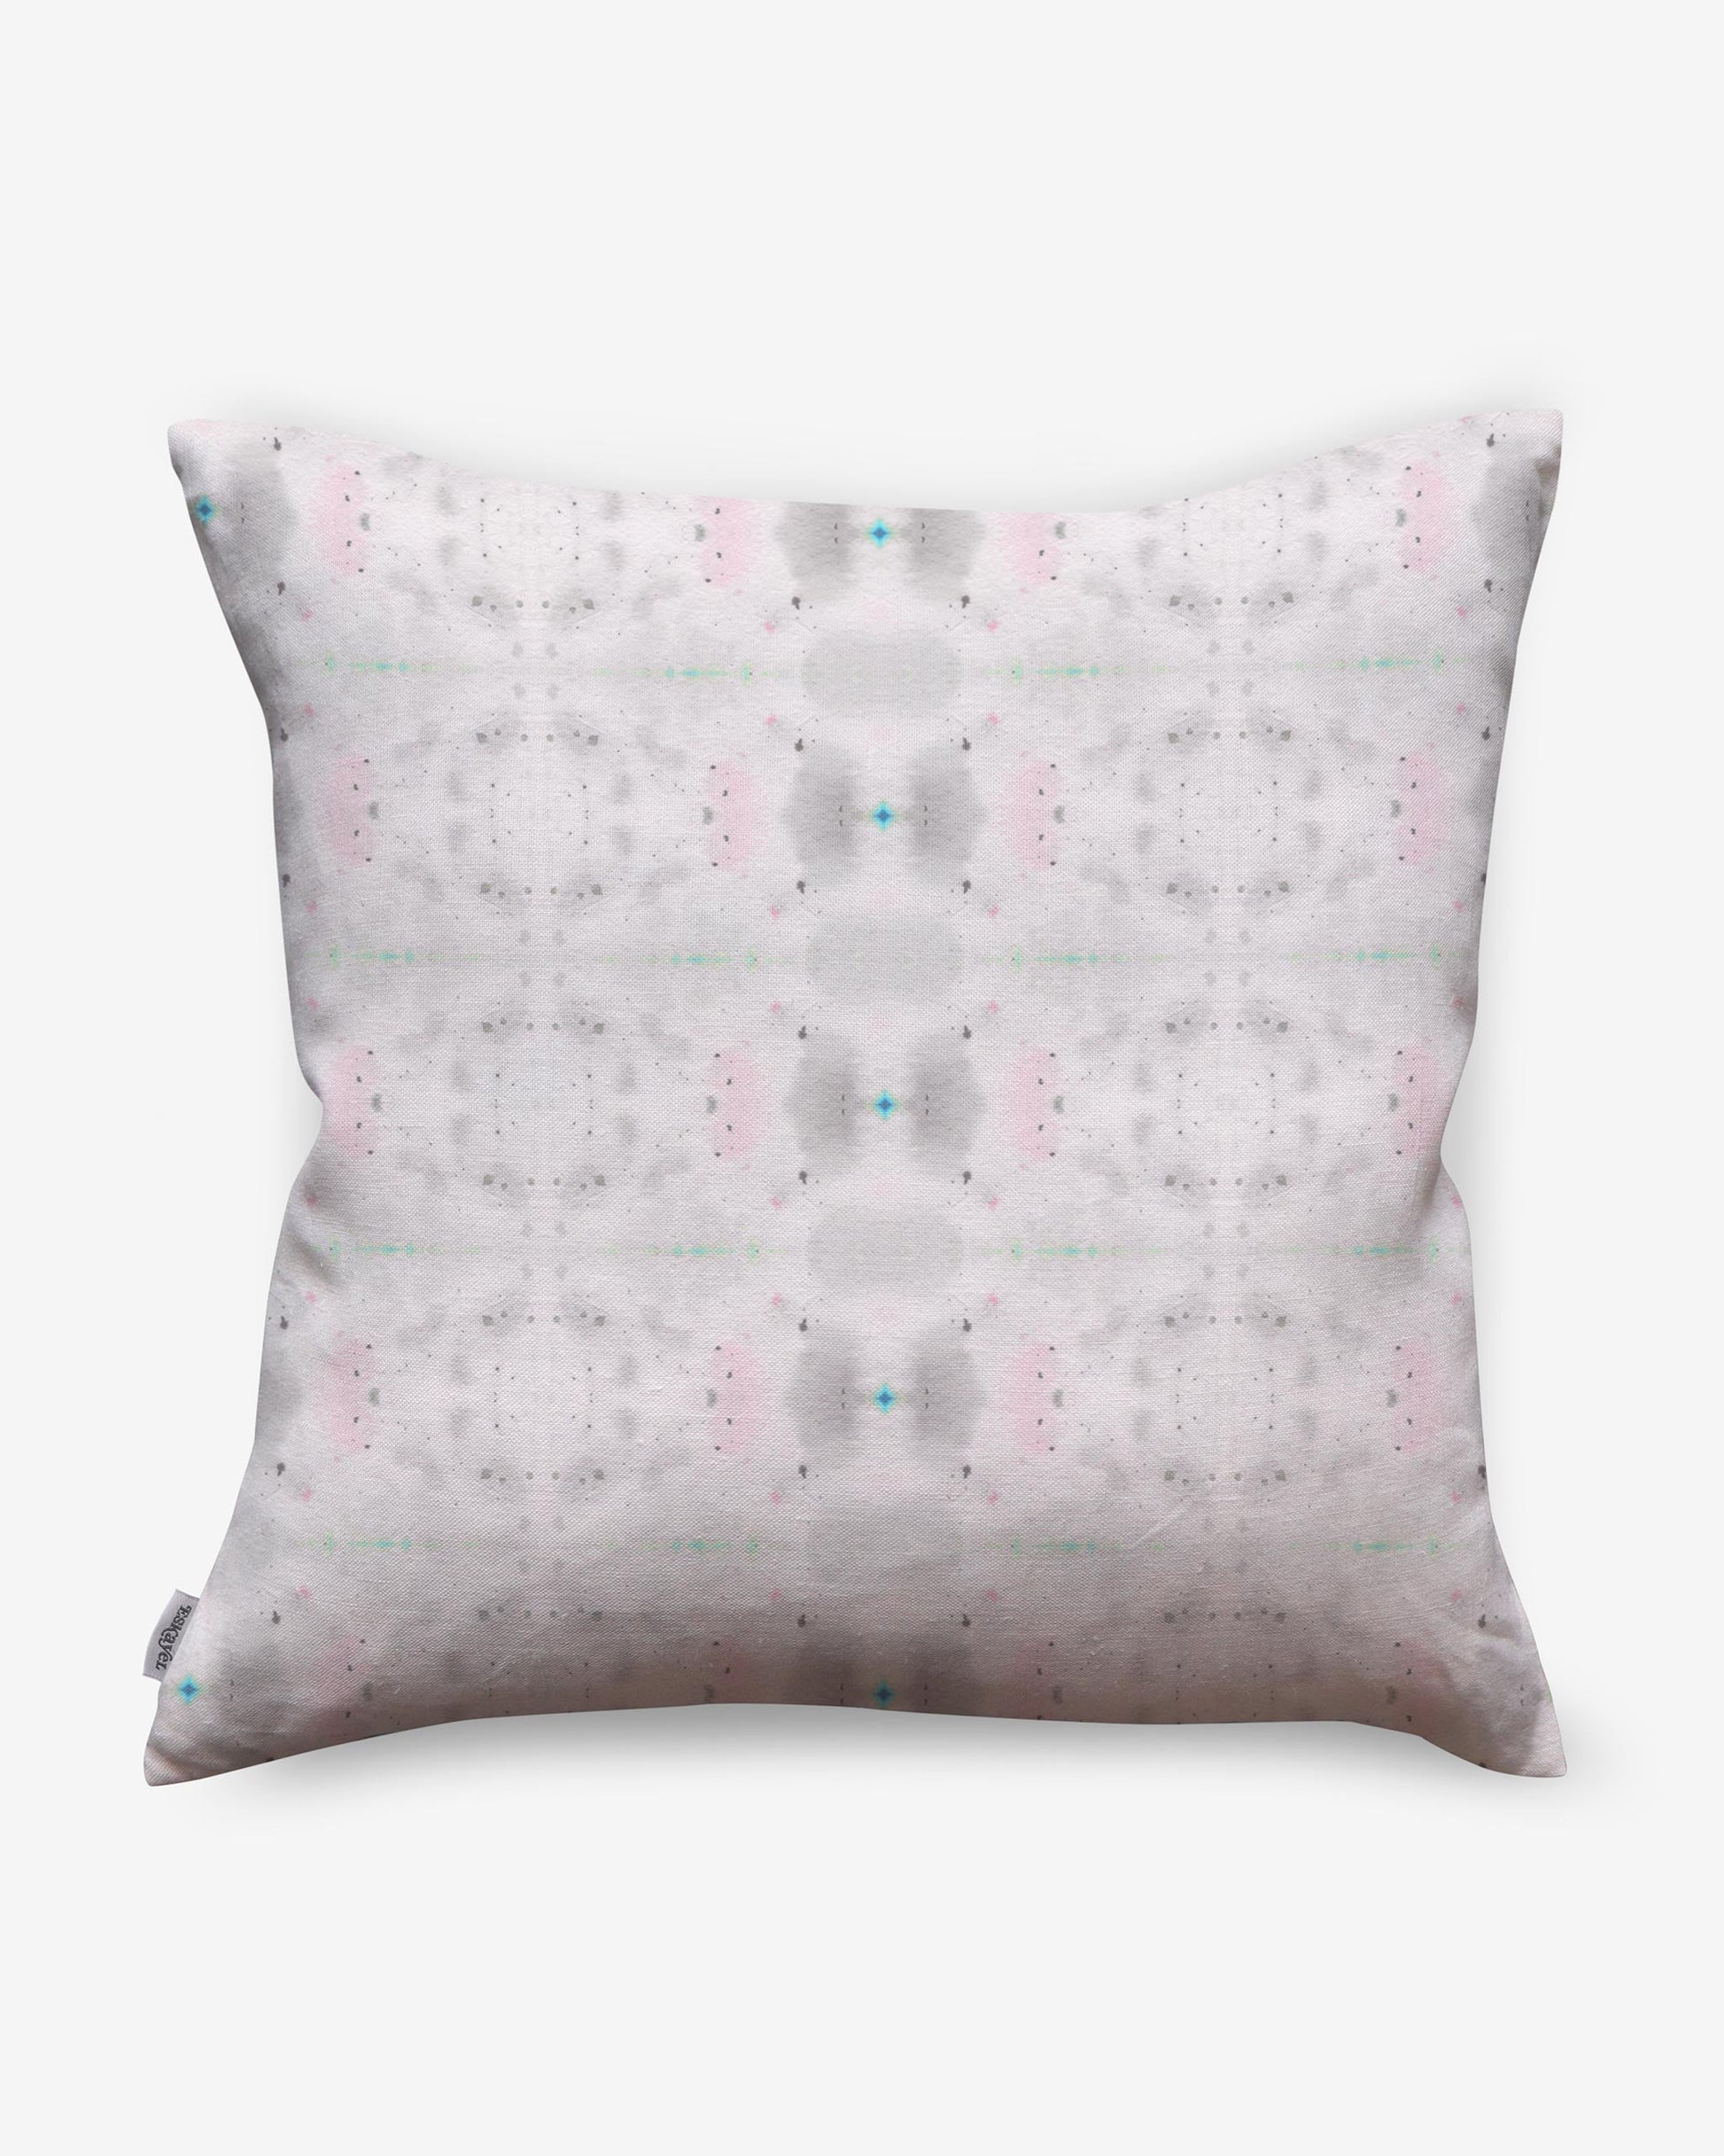 An Astral Pillow with a pink and white pattern from the Jangala Collection